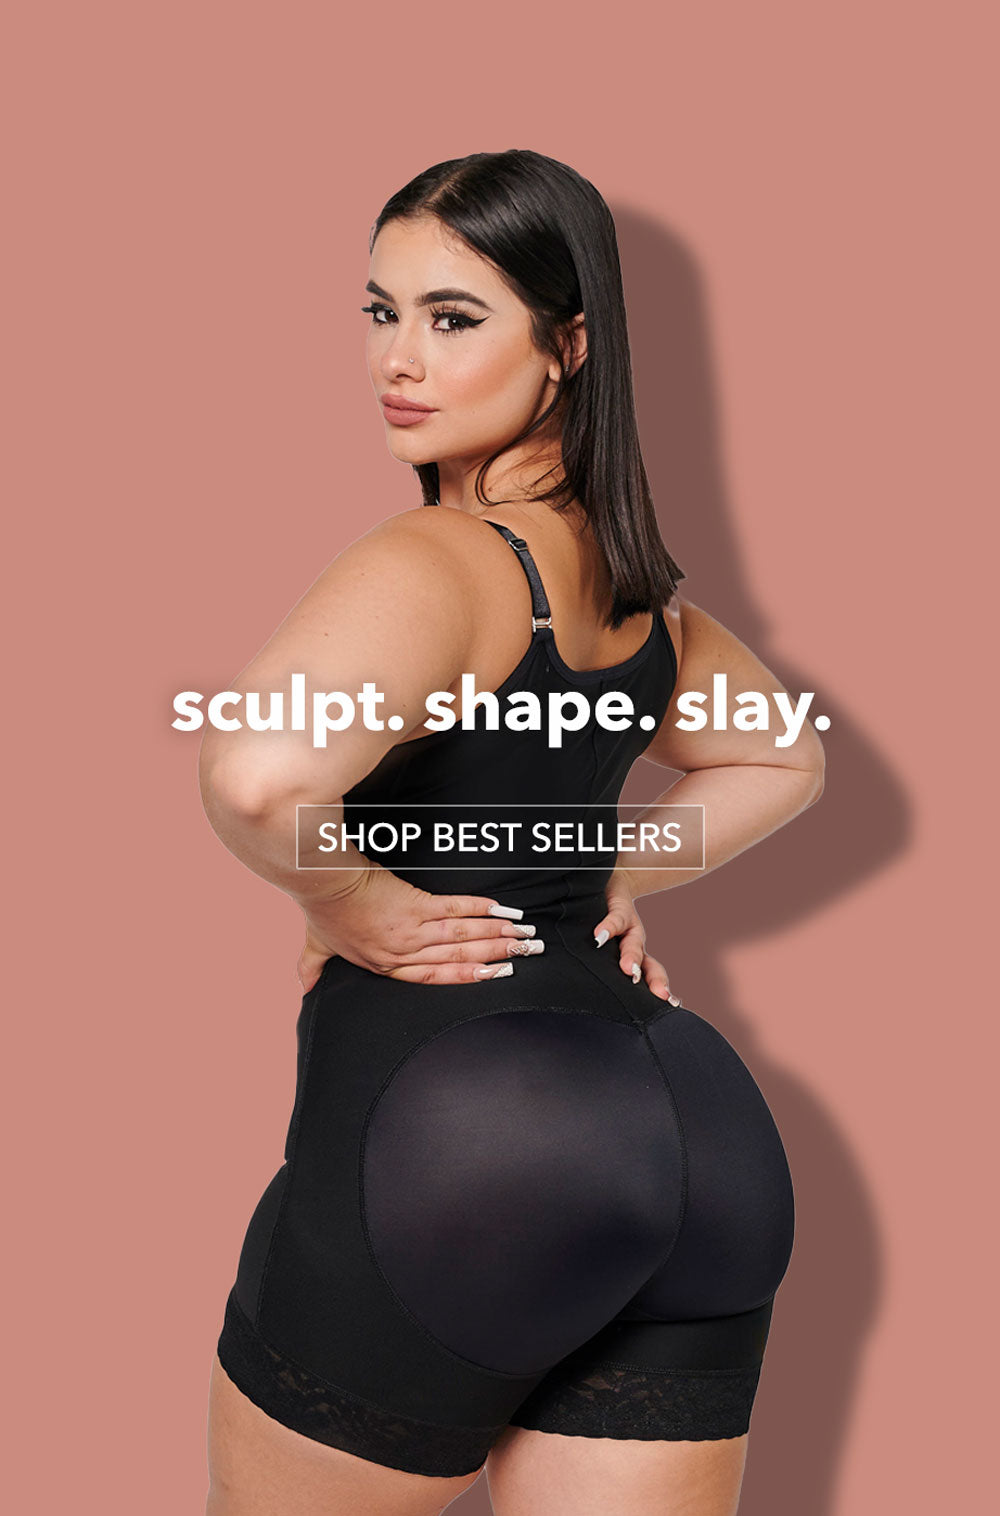 Sculpt Your Curves with CURVY-Faja, the perfect waist trainer